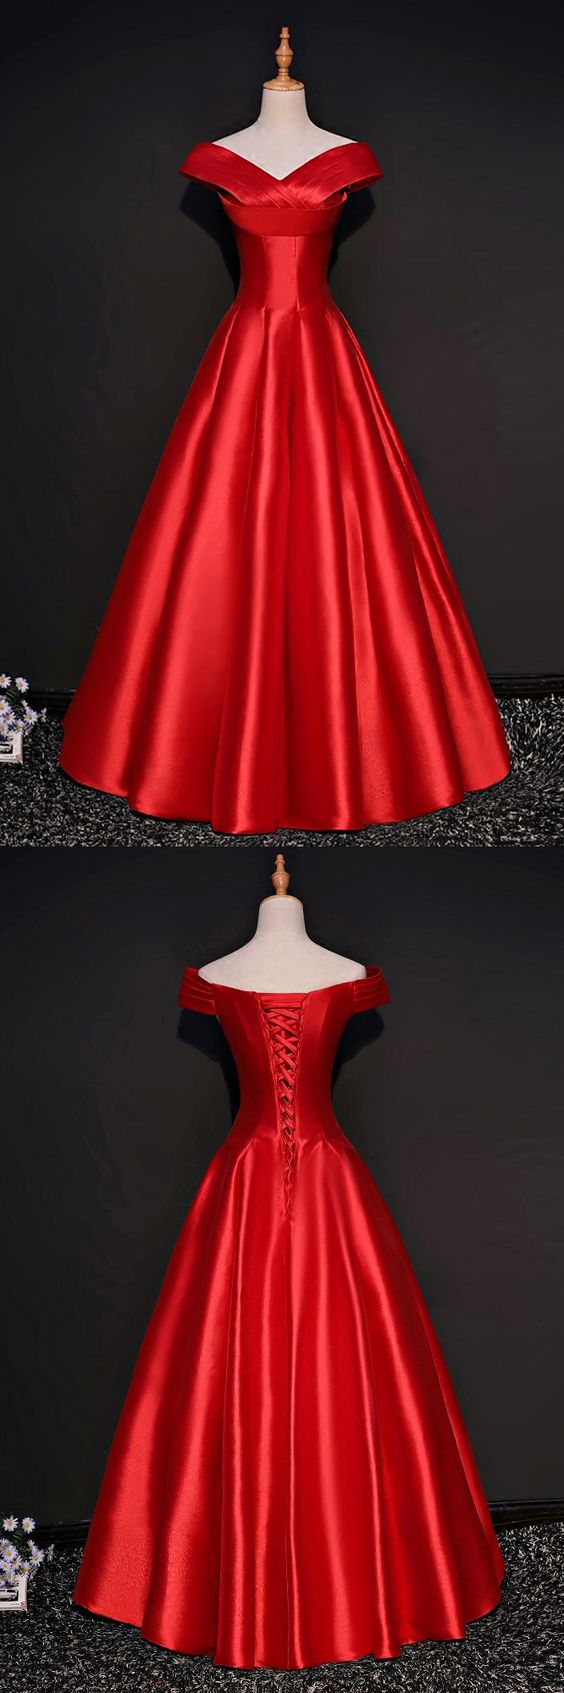 Simple Red Formal Satin Party Dress With Cap Sleeves V-neck Party Dress